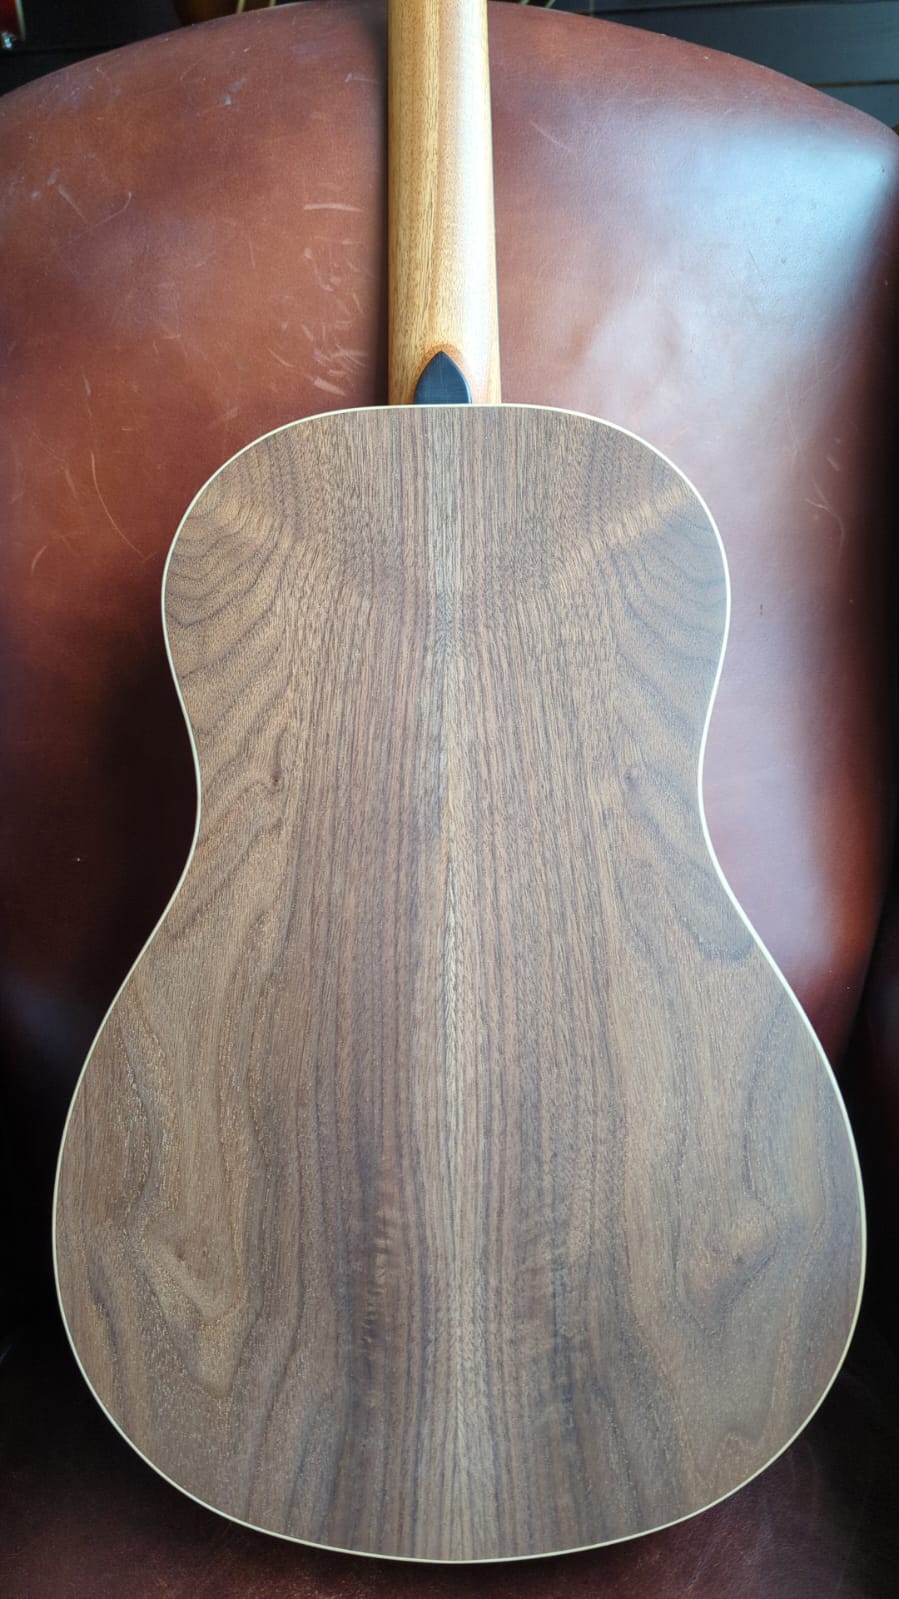 Dowina Walnut BV-H Deluxe Torrified Spruce, Acoustic Guitar for sale at Richards Guitars.